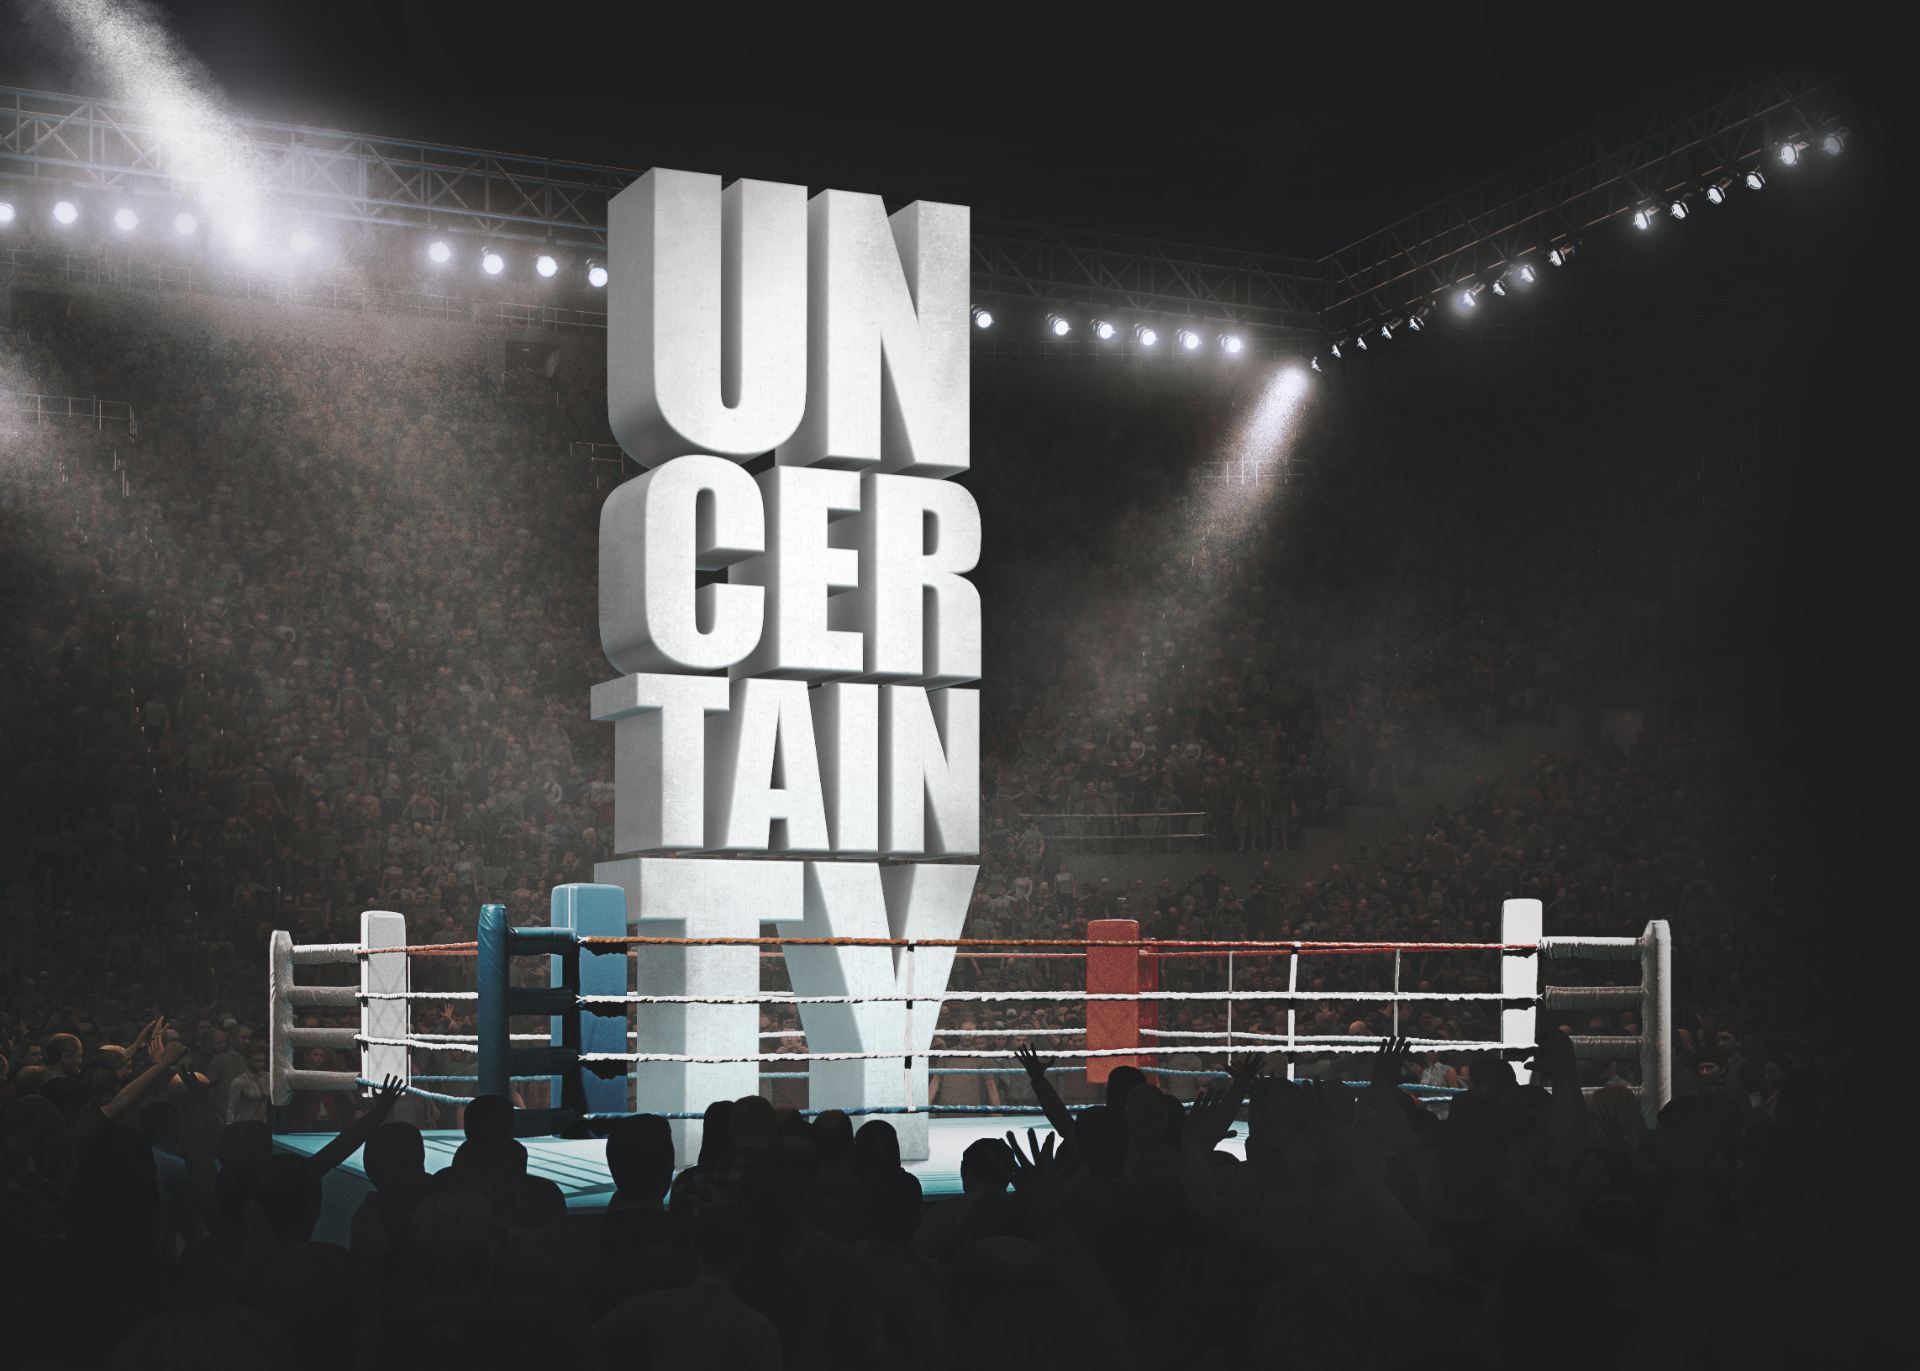 "Uncertainty" under spotlight in a boxing ring